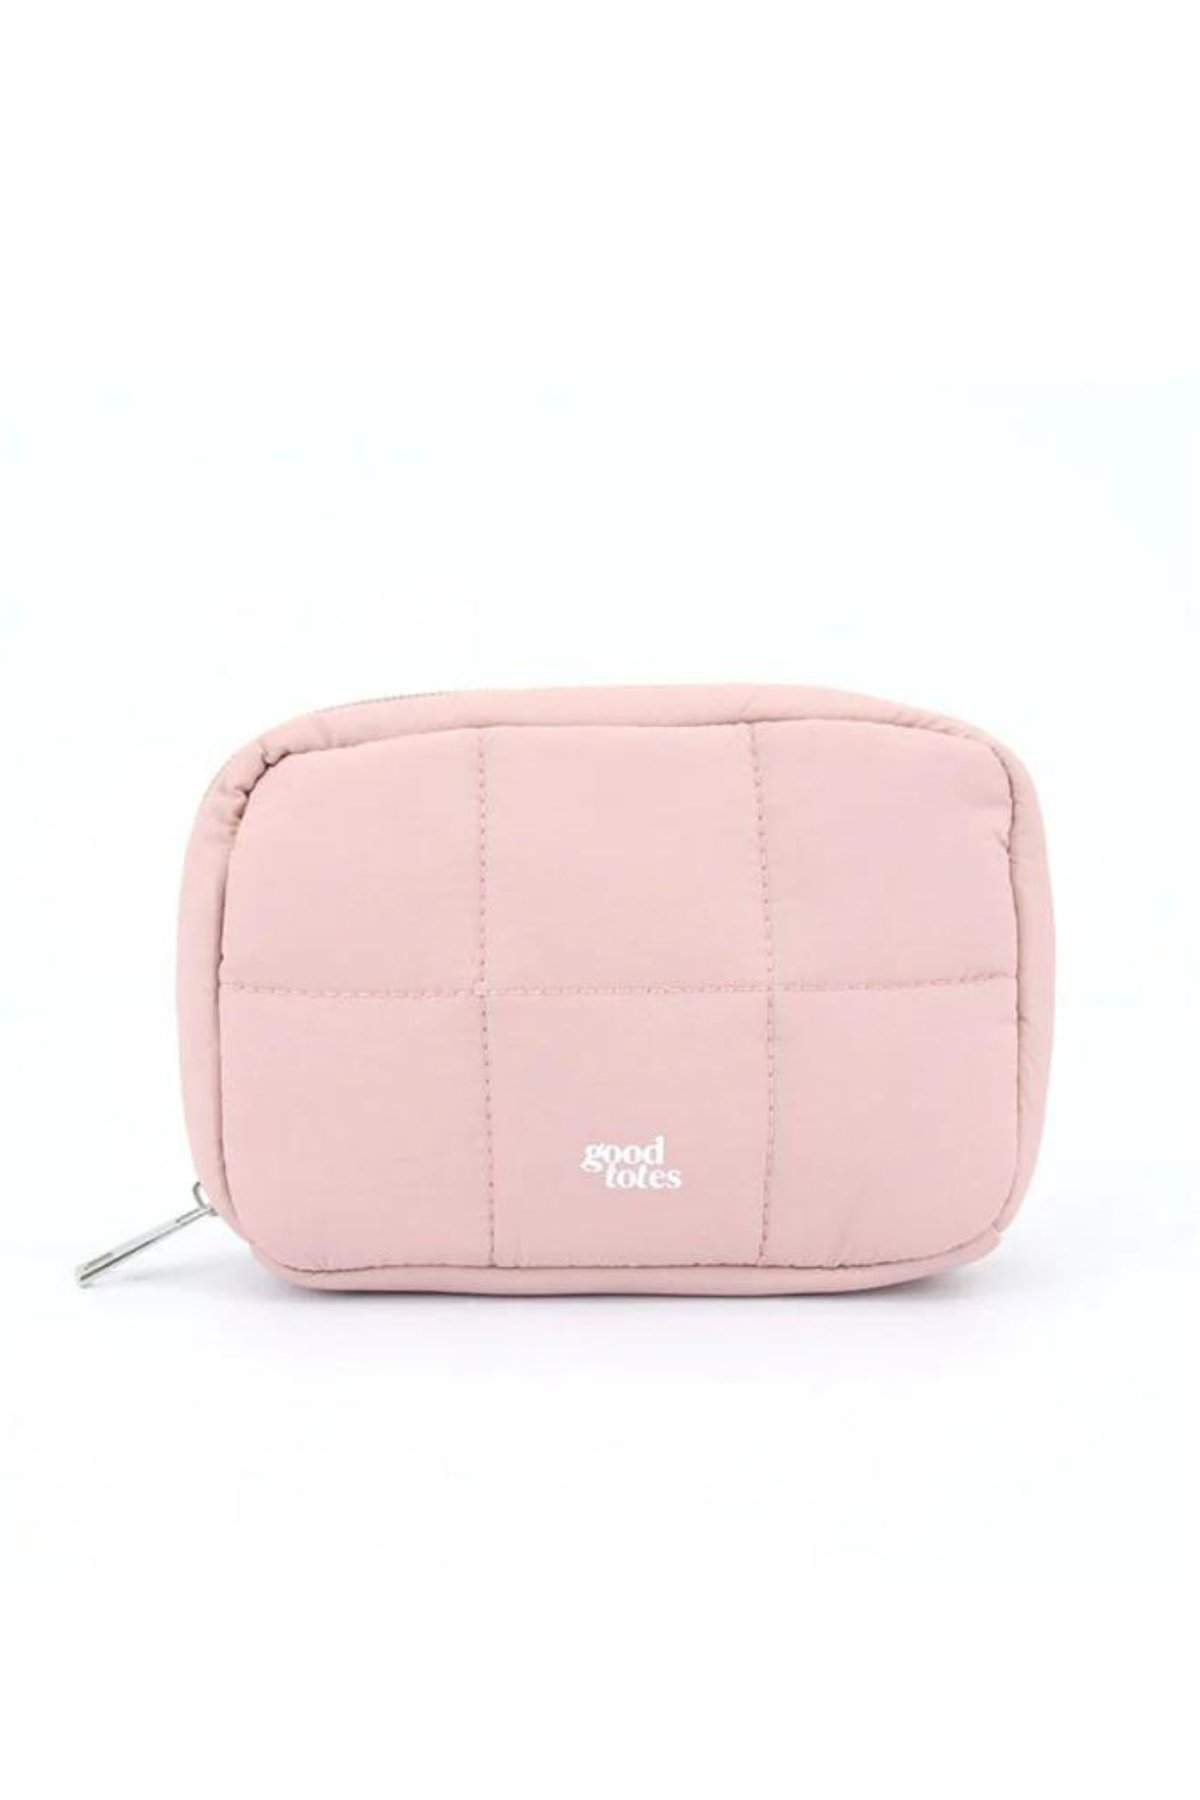 Good Totes (Bread Puffer Pouch - Strawberry)